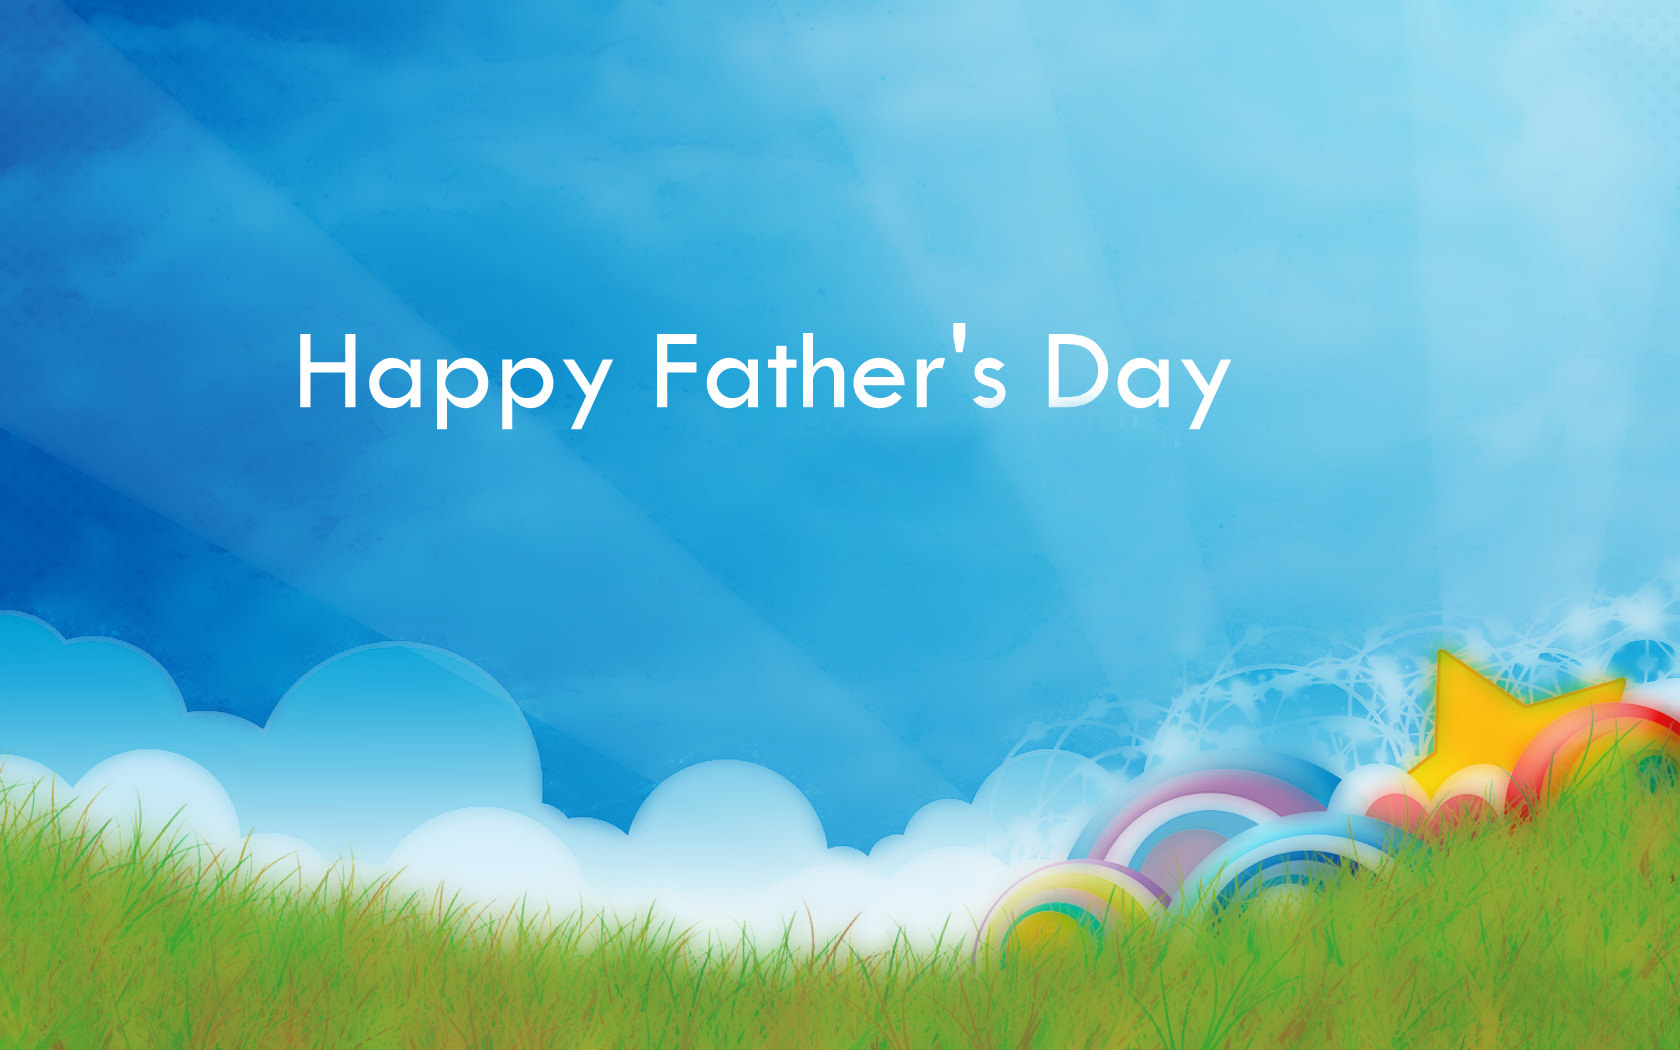 Happy Fathers Day Wallpapers download free